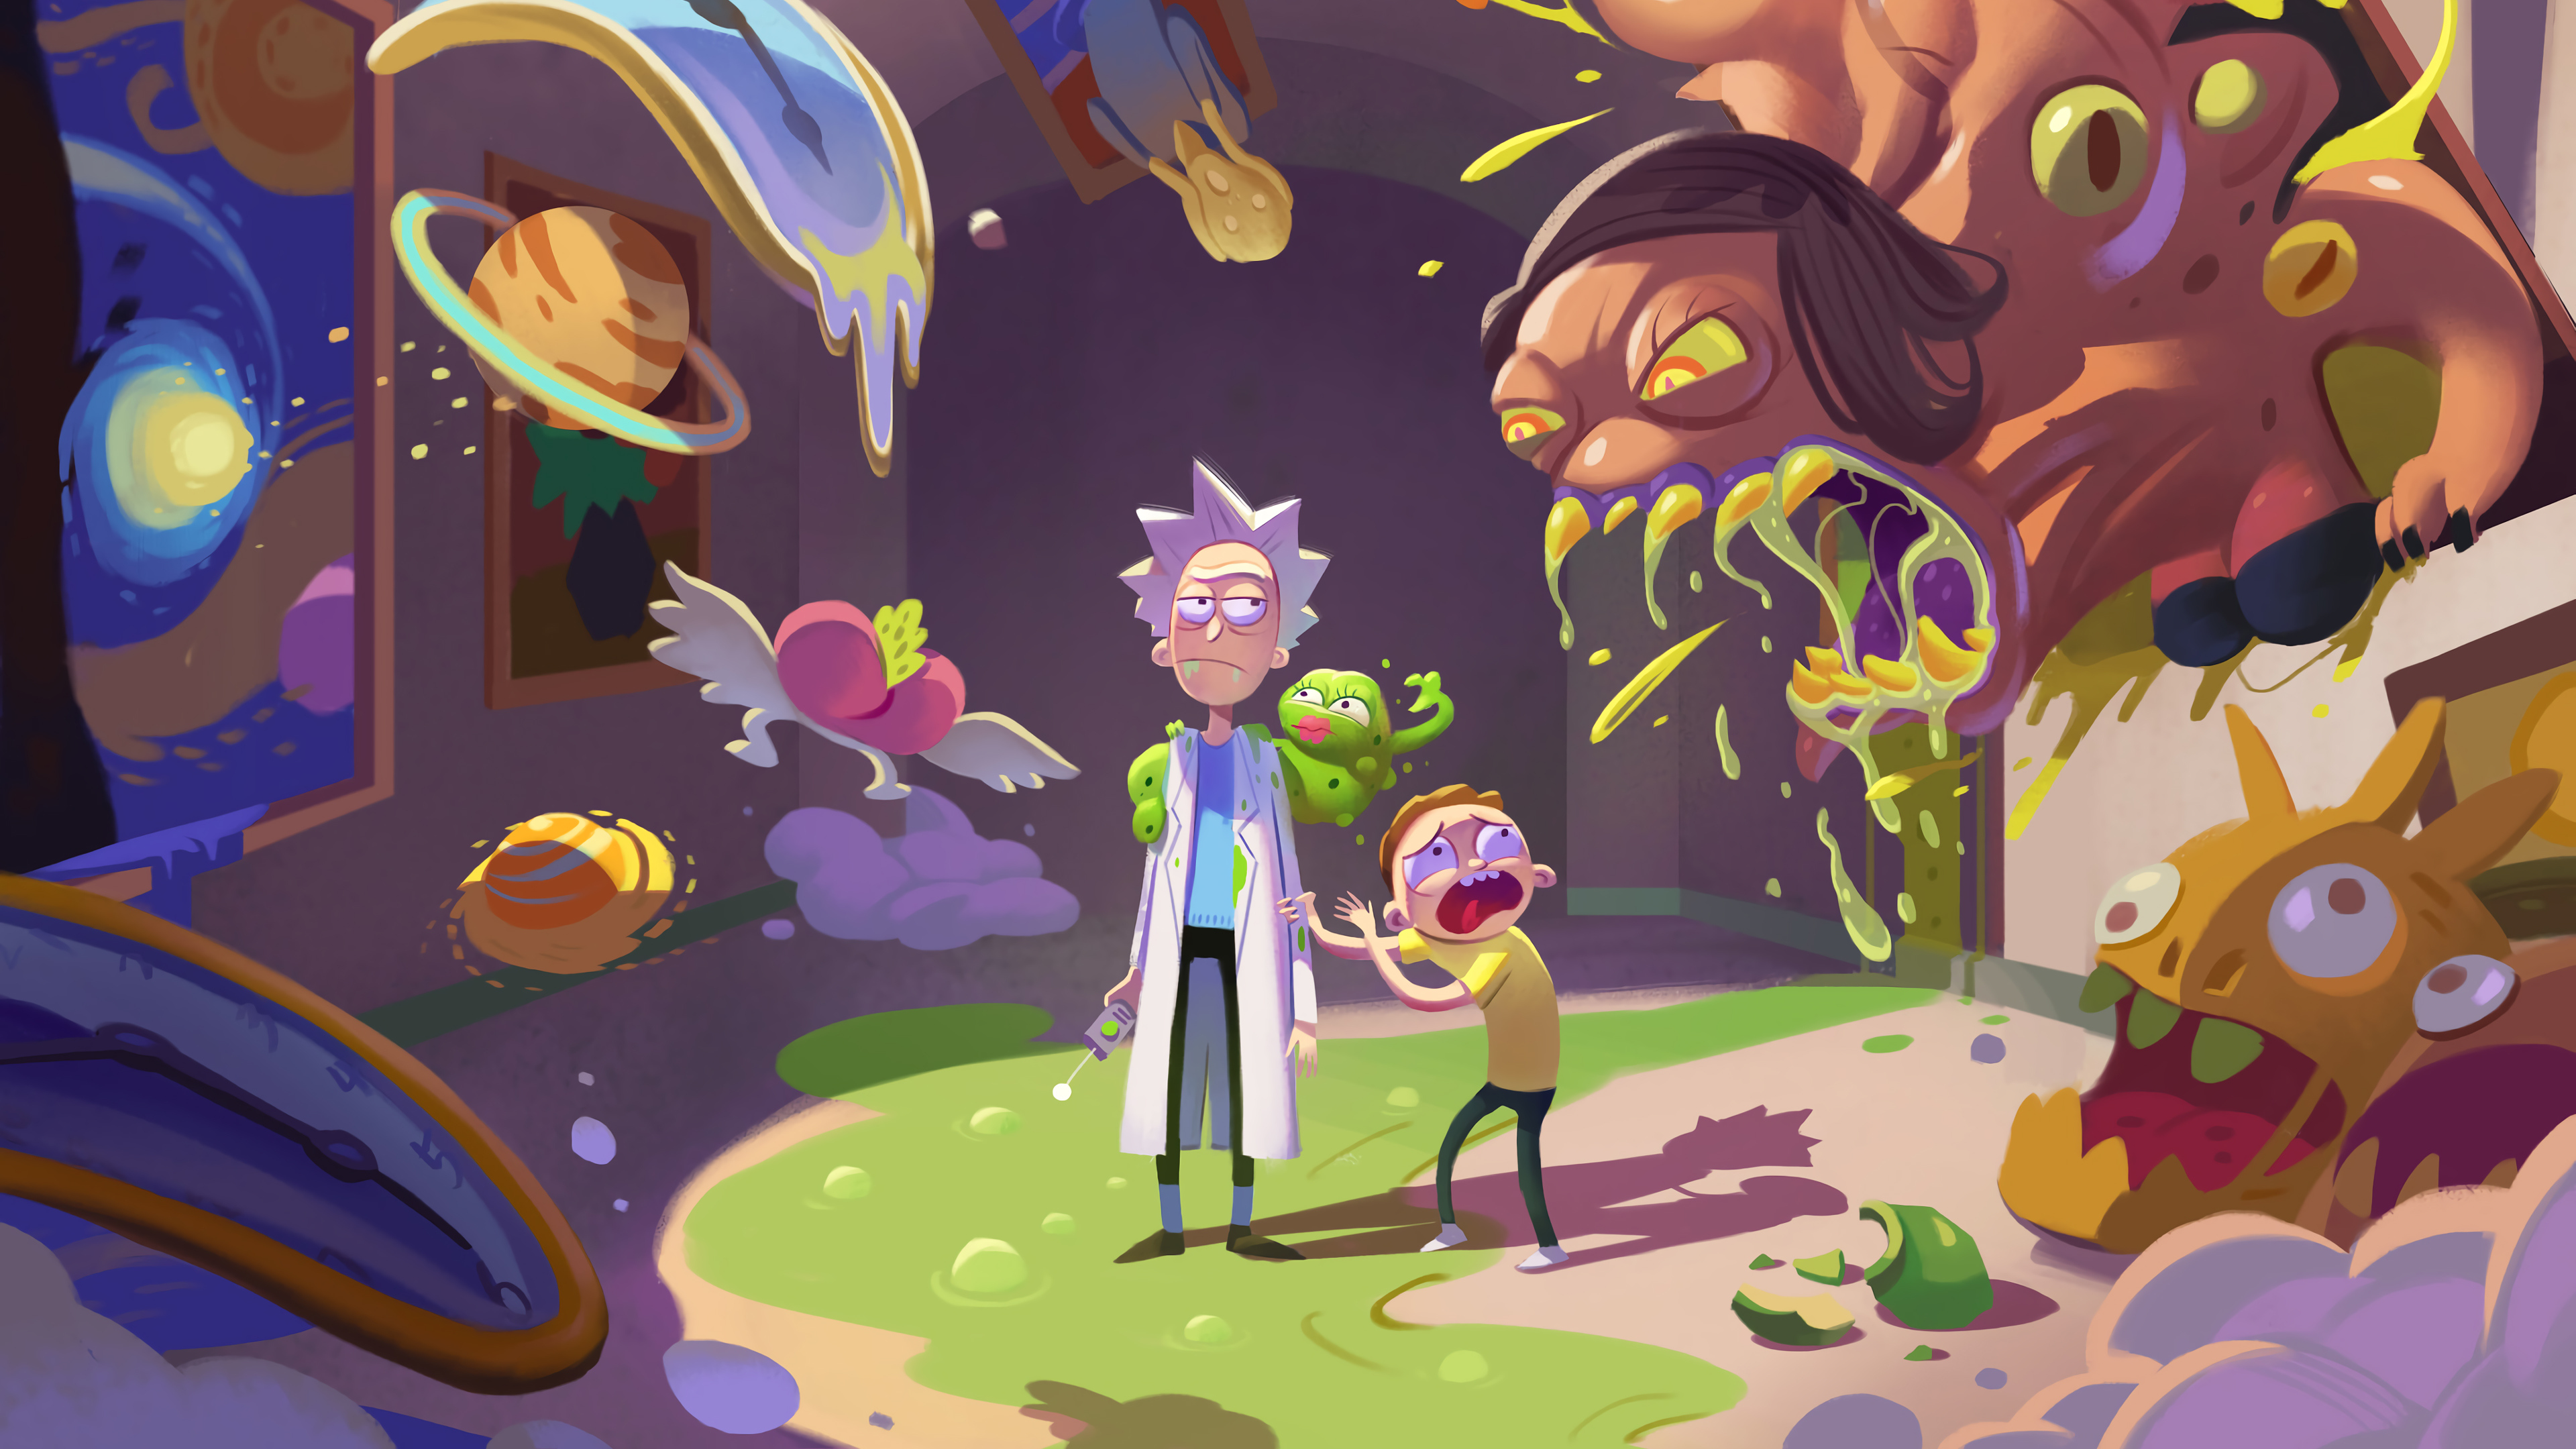 rick and morty, tv show, morty smith, rick sanchez High Definition image